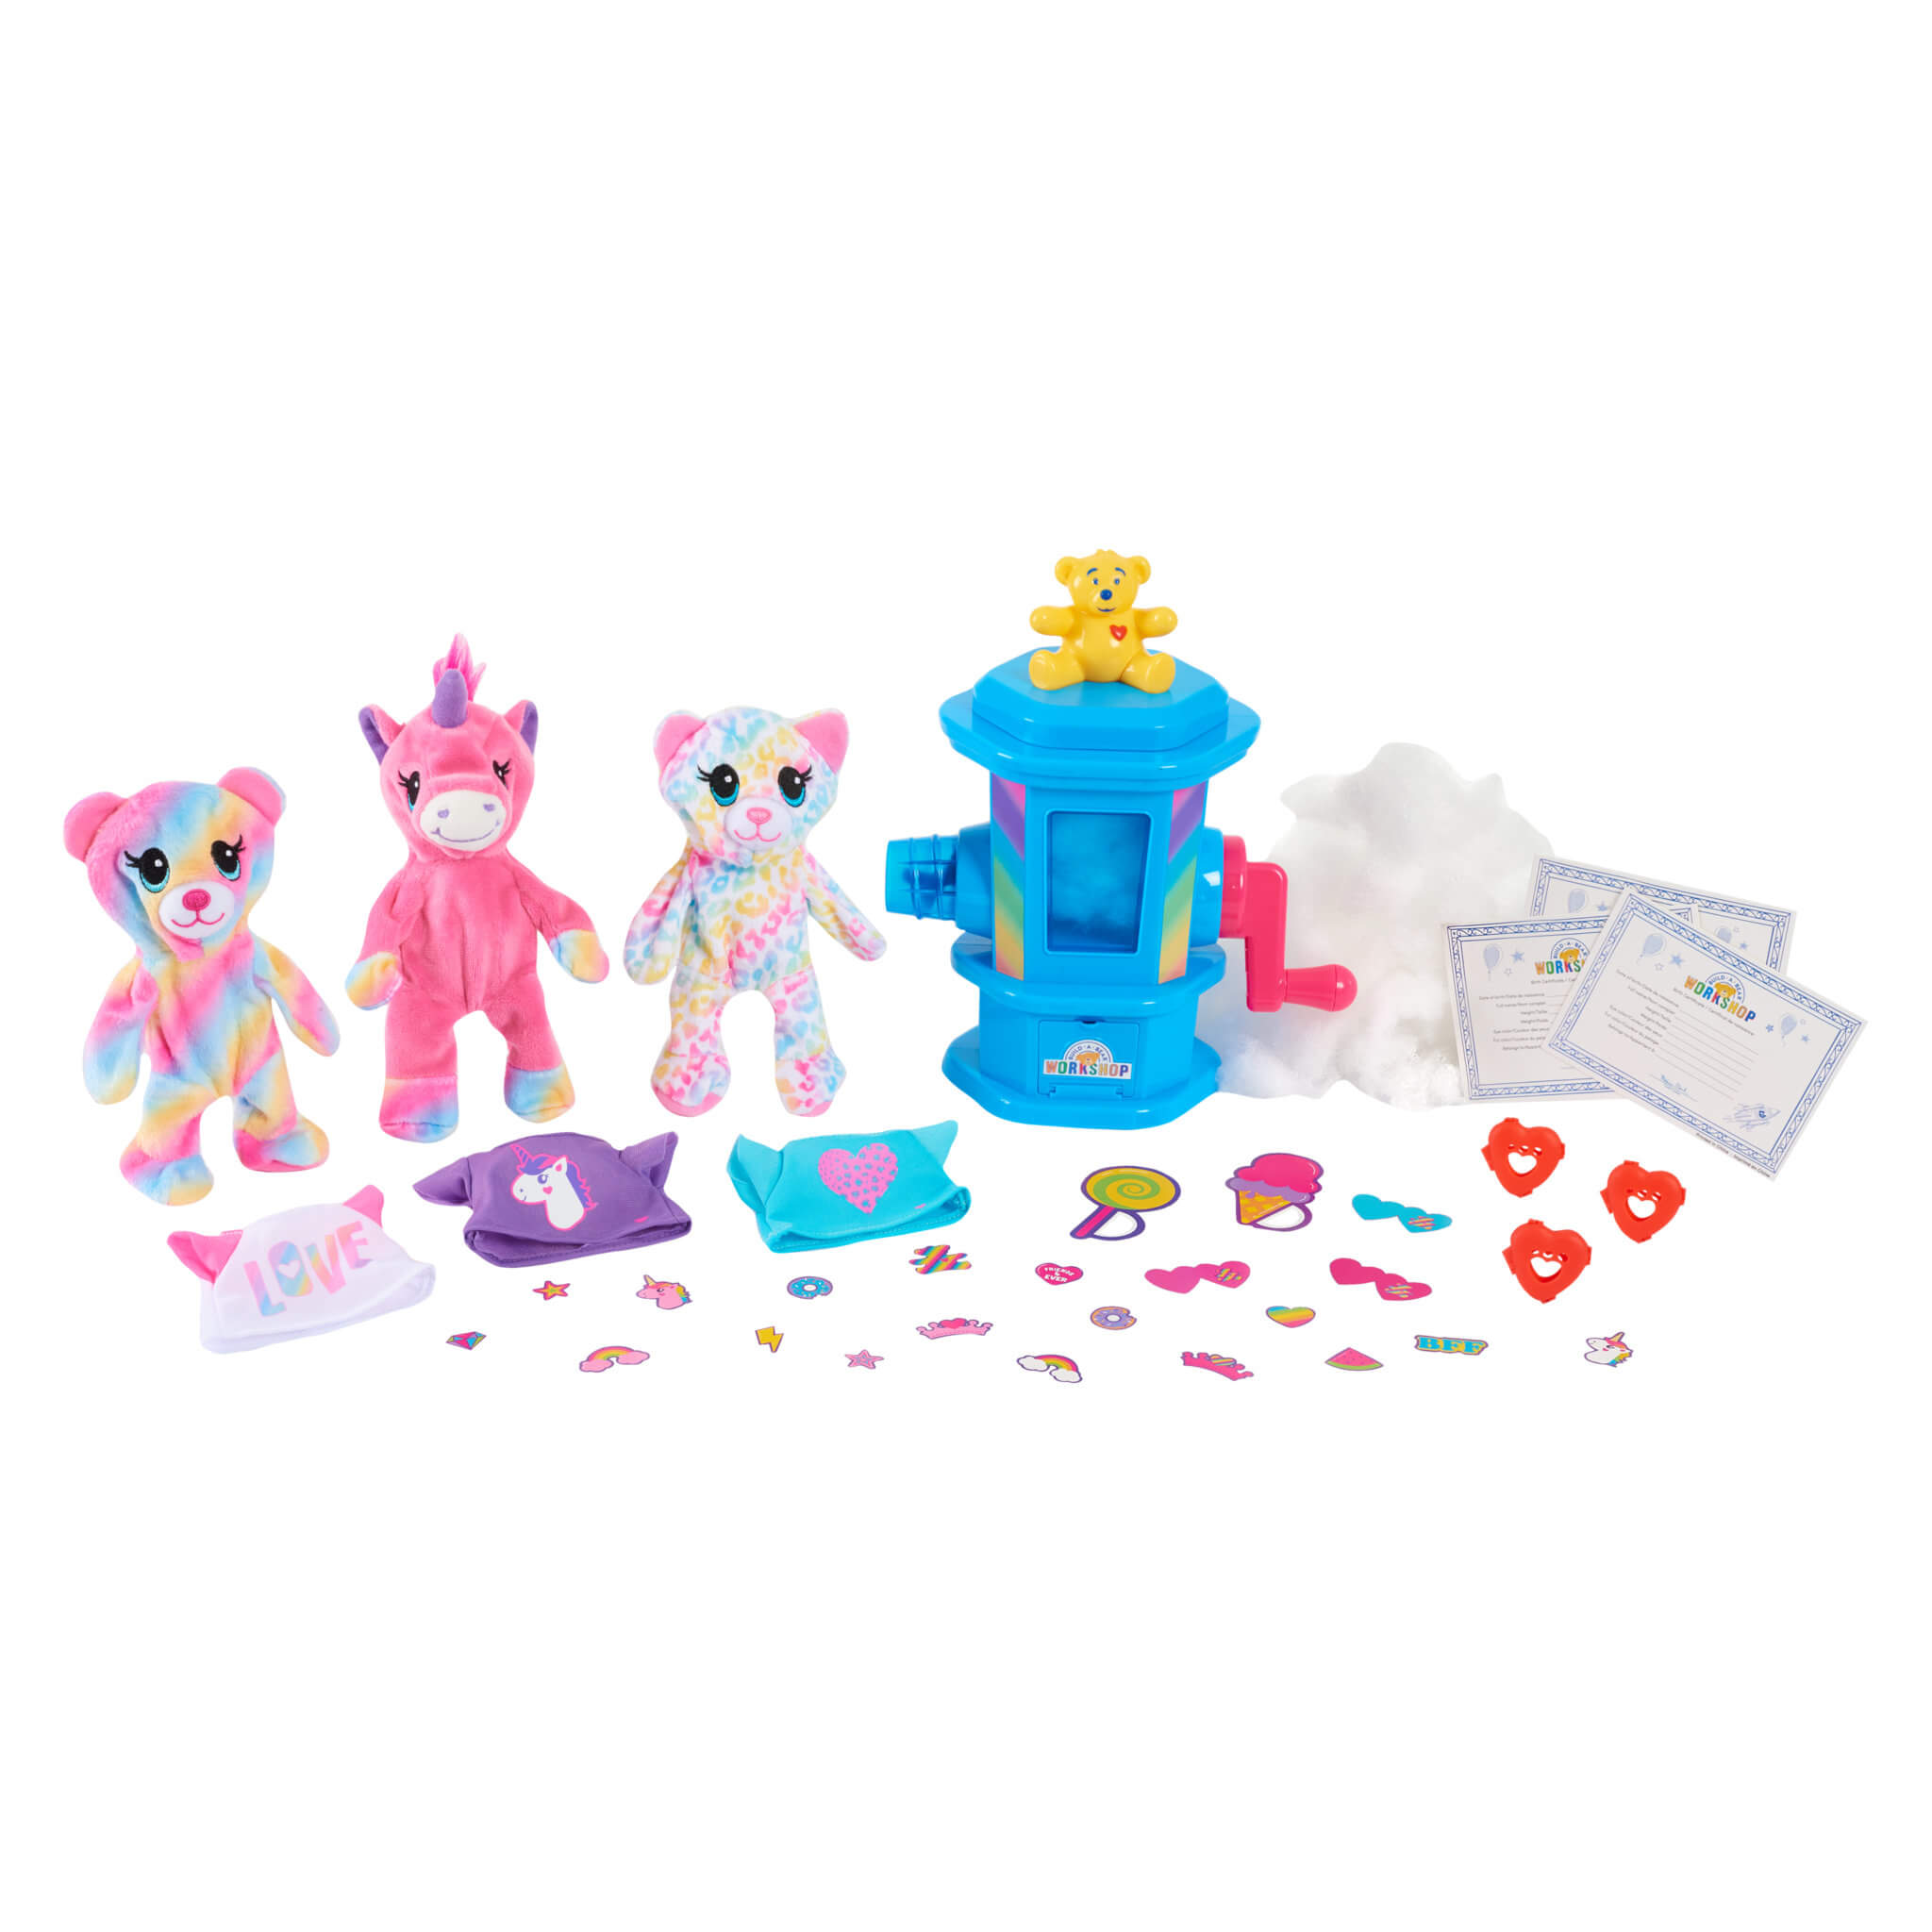 Build-A-Bear Workshop Stuffing Station with Plush ONLY $25 (Reg $50)